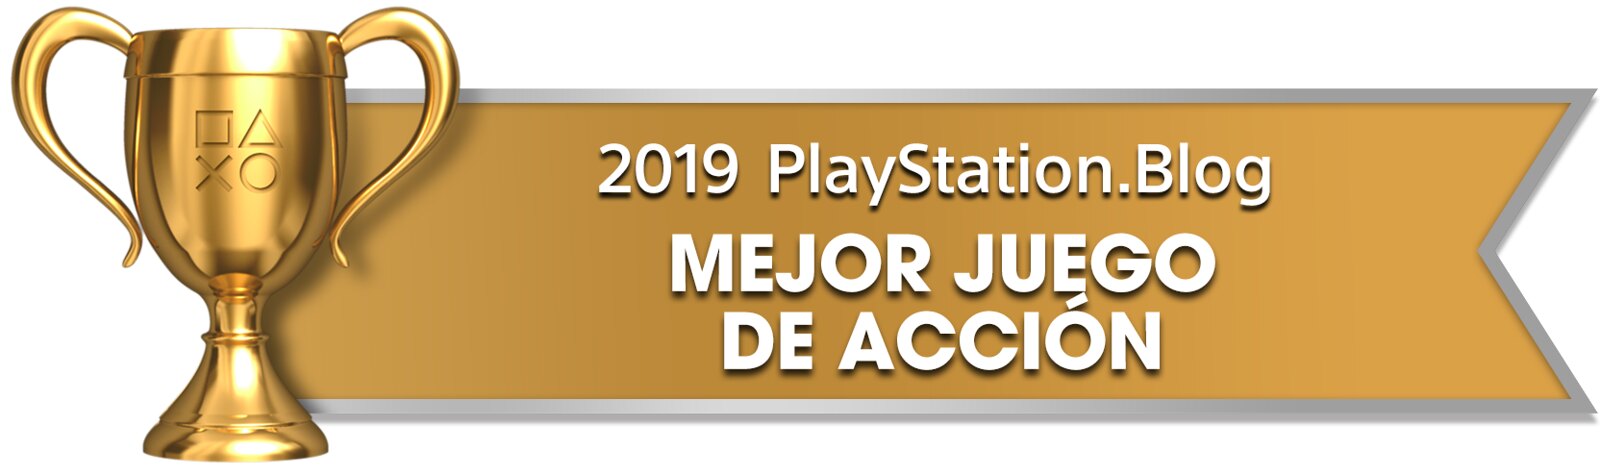 PS Blog Game of the Year 2019 - Best Action Game - 2 - Gold